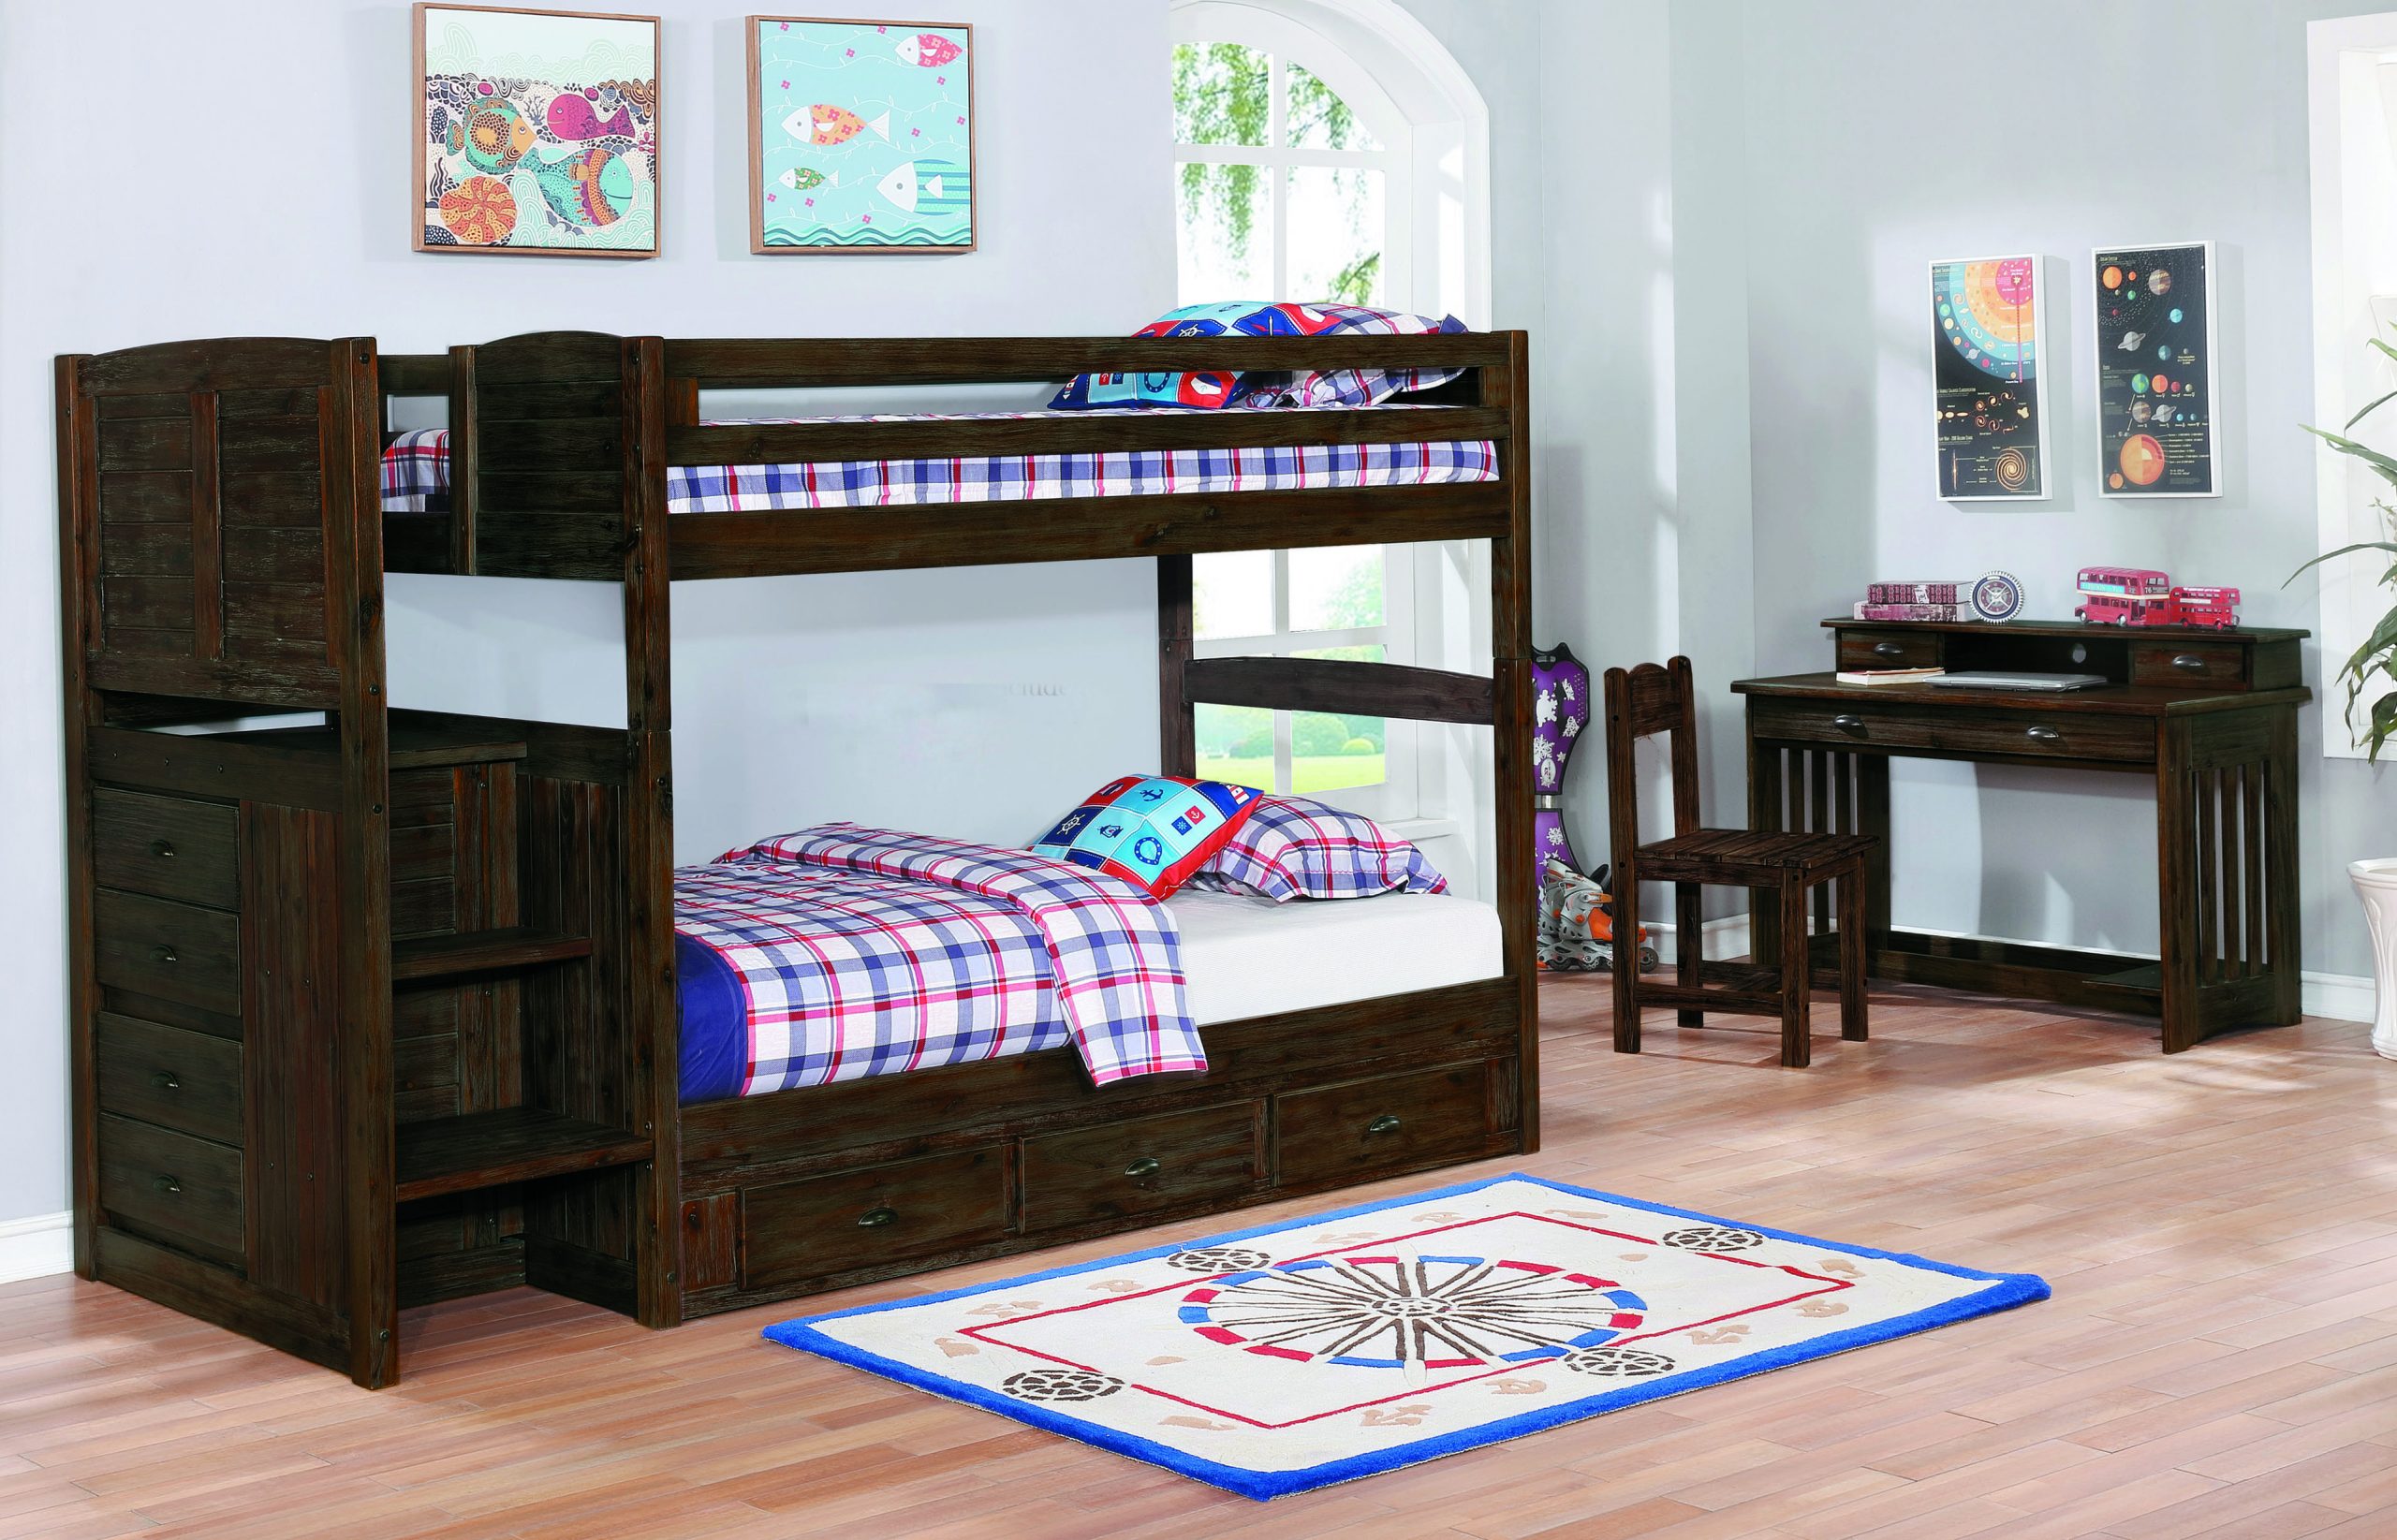 Beds for Playrooms